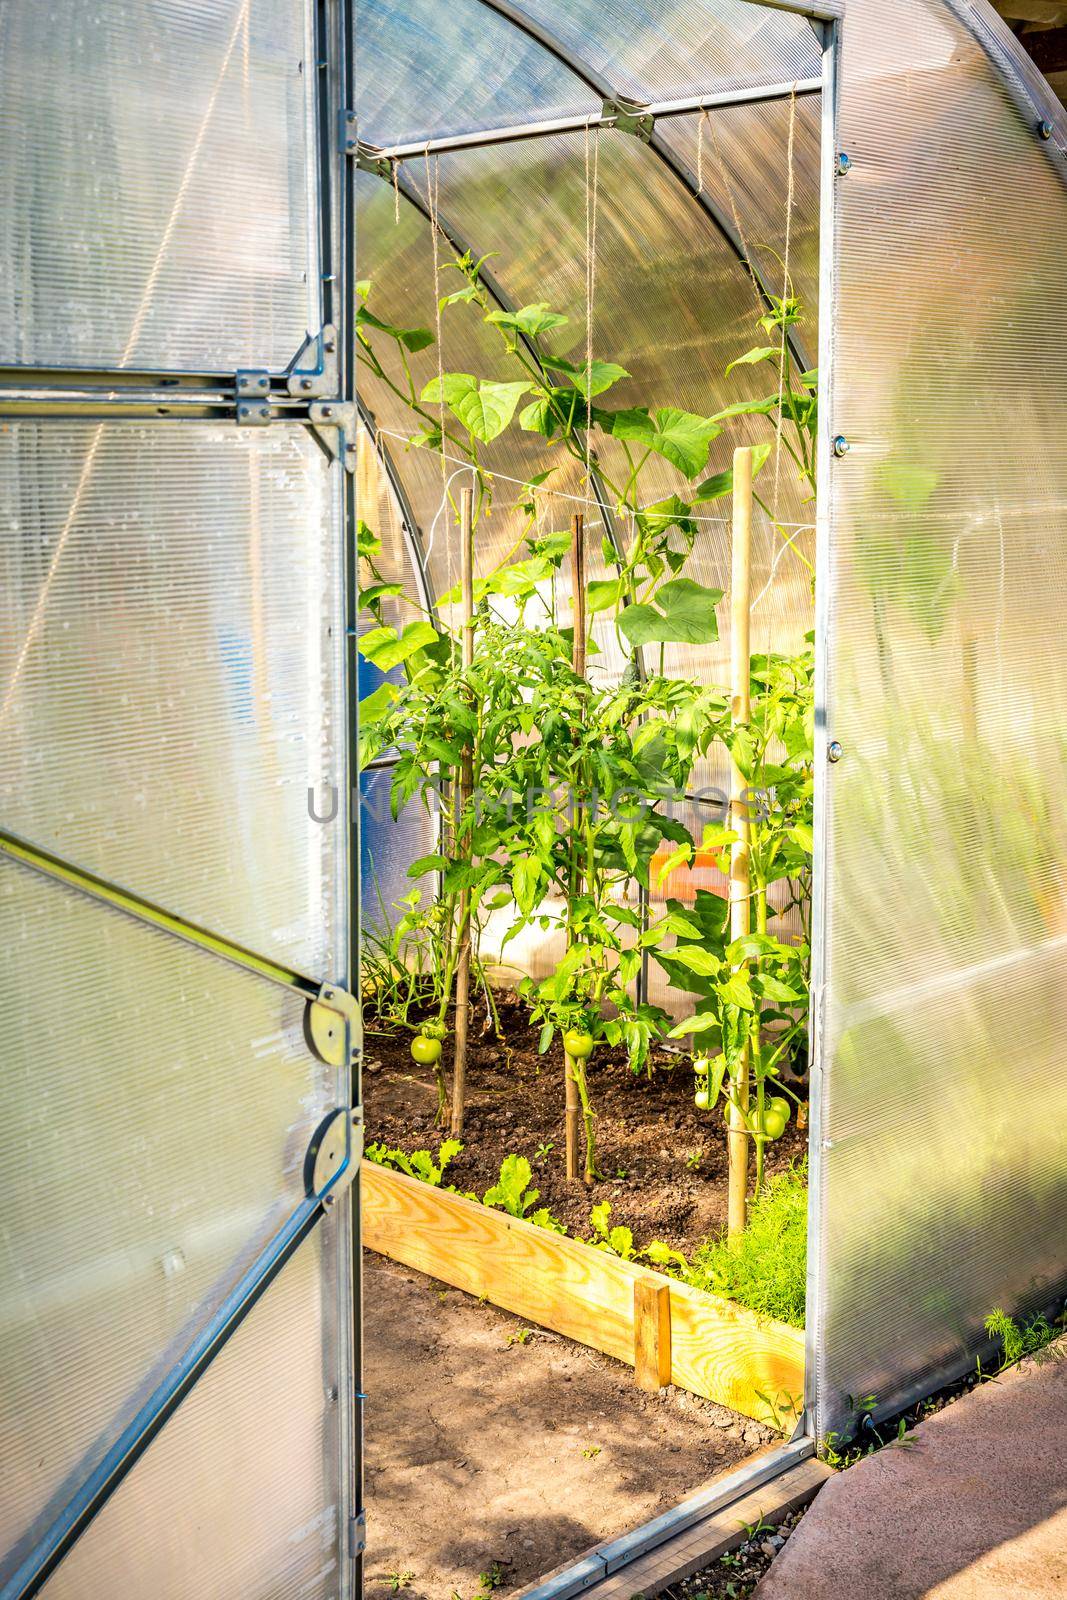 Small greenhouse with tomatoes in private house garden. Inside view